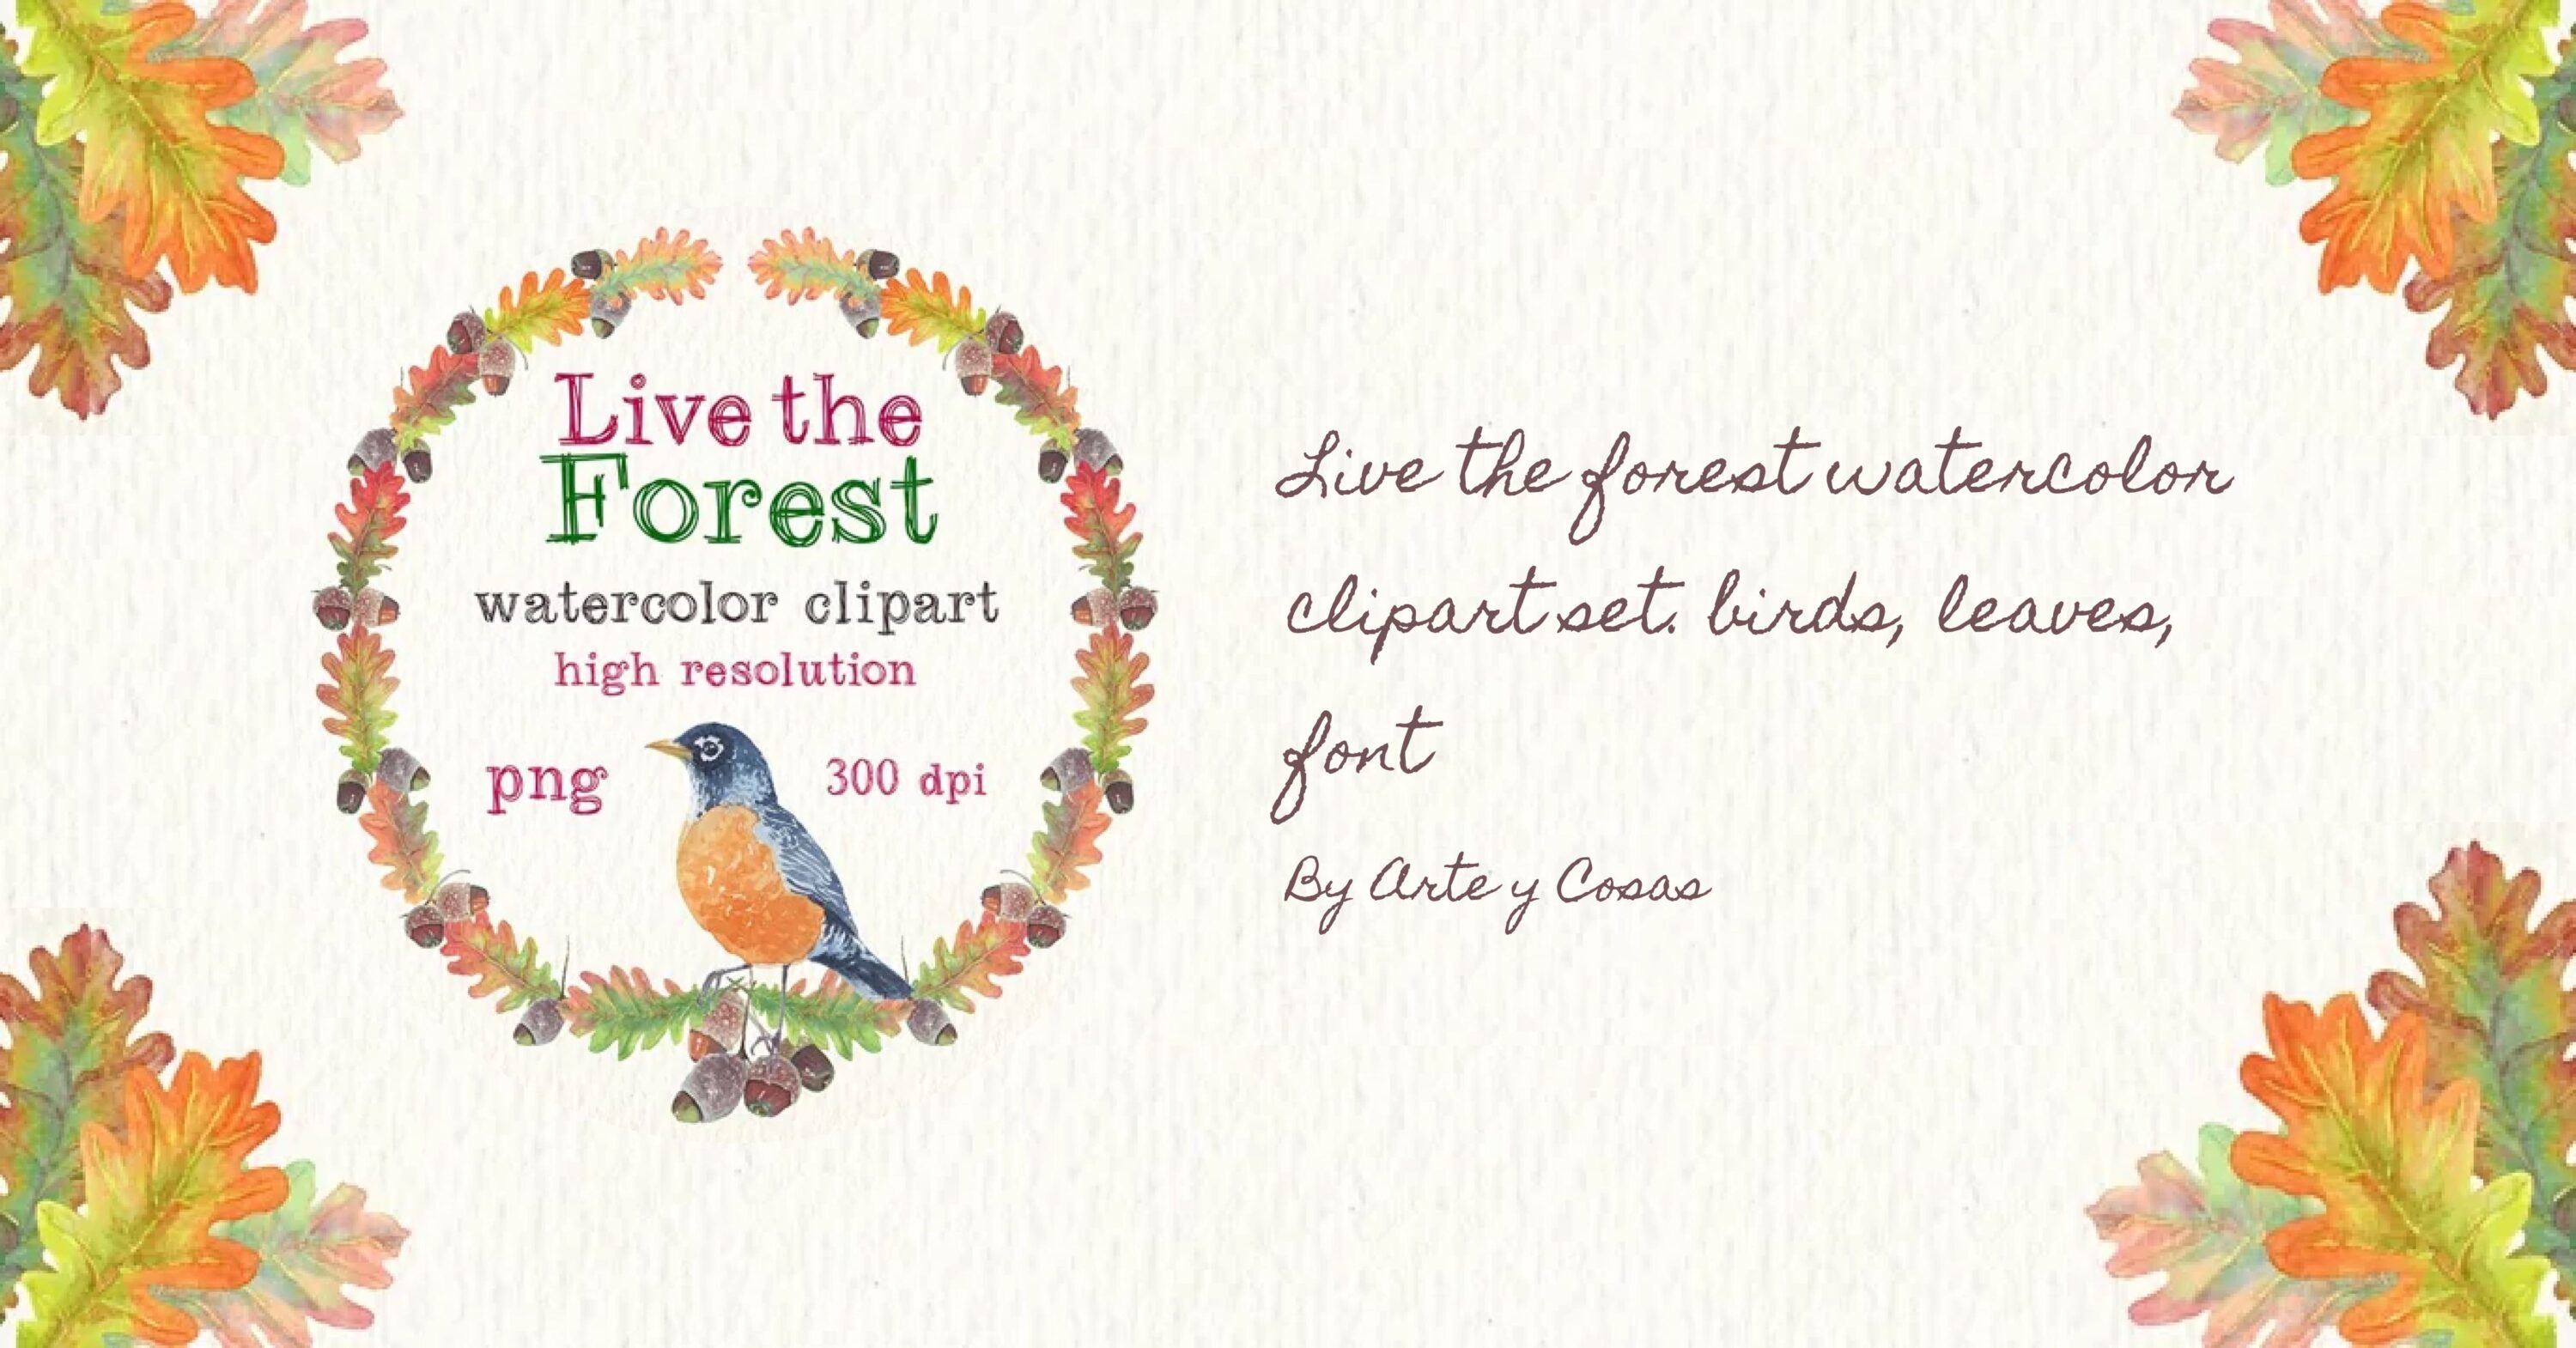 Live the Forest Watercolor Clipart Set. Birds, Leaves, Font facebook image.